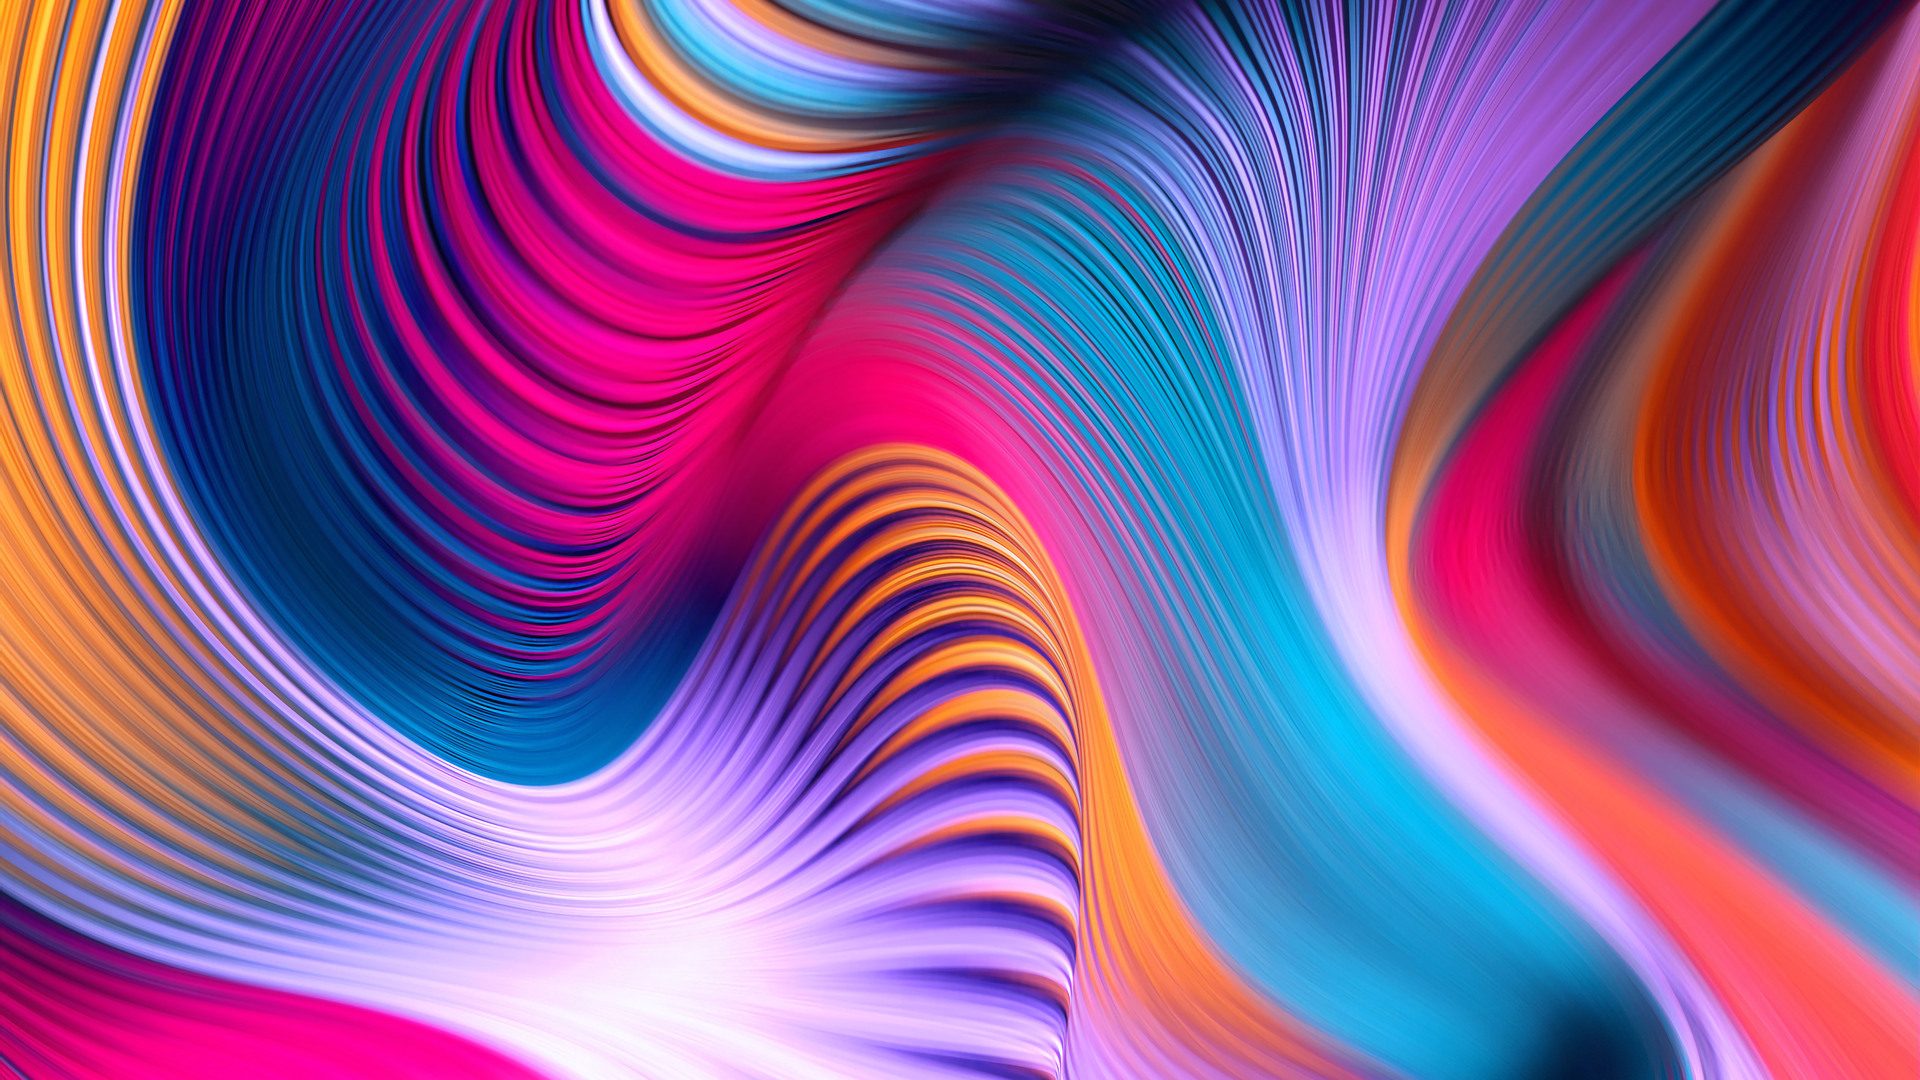 Colorful Abstract Moving Wave Digital Art 4k Wallpaper